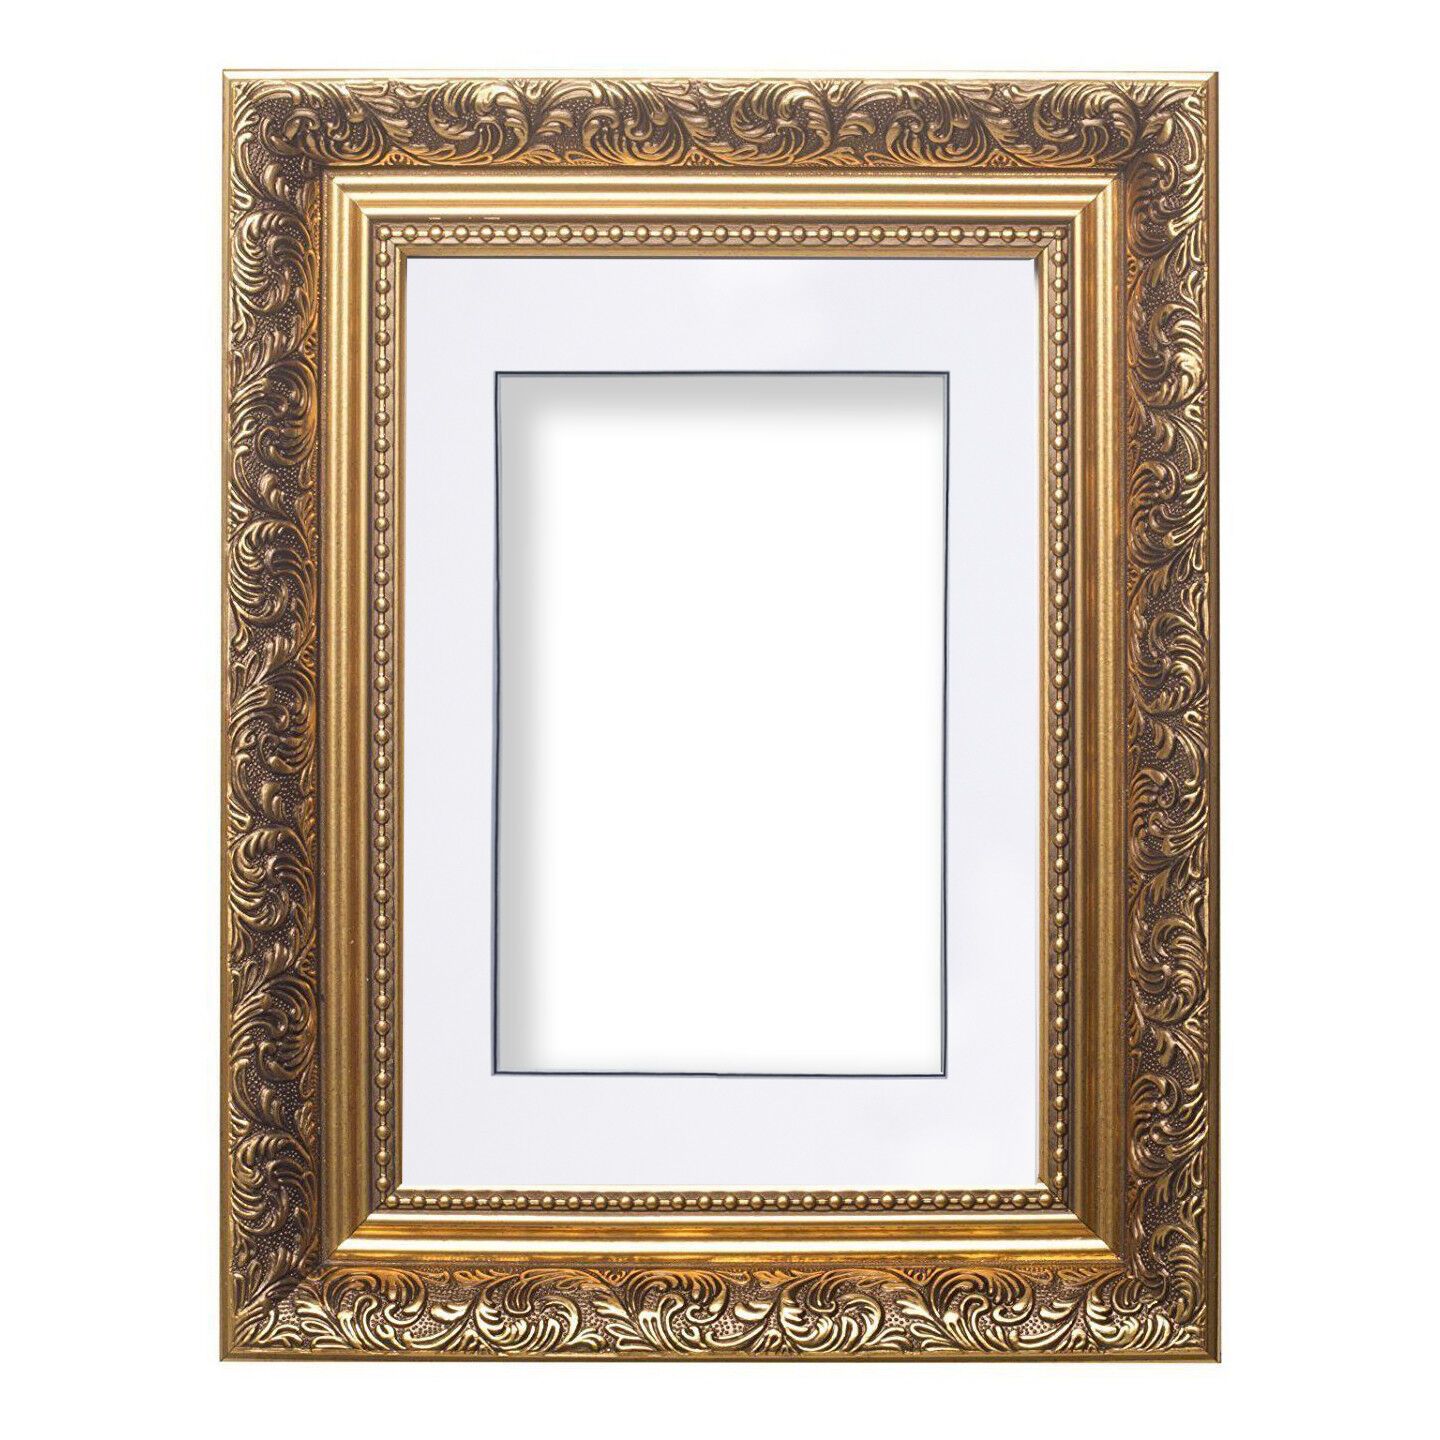 How To Paint Antique Picture Frames